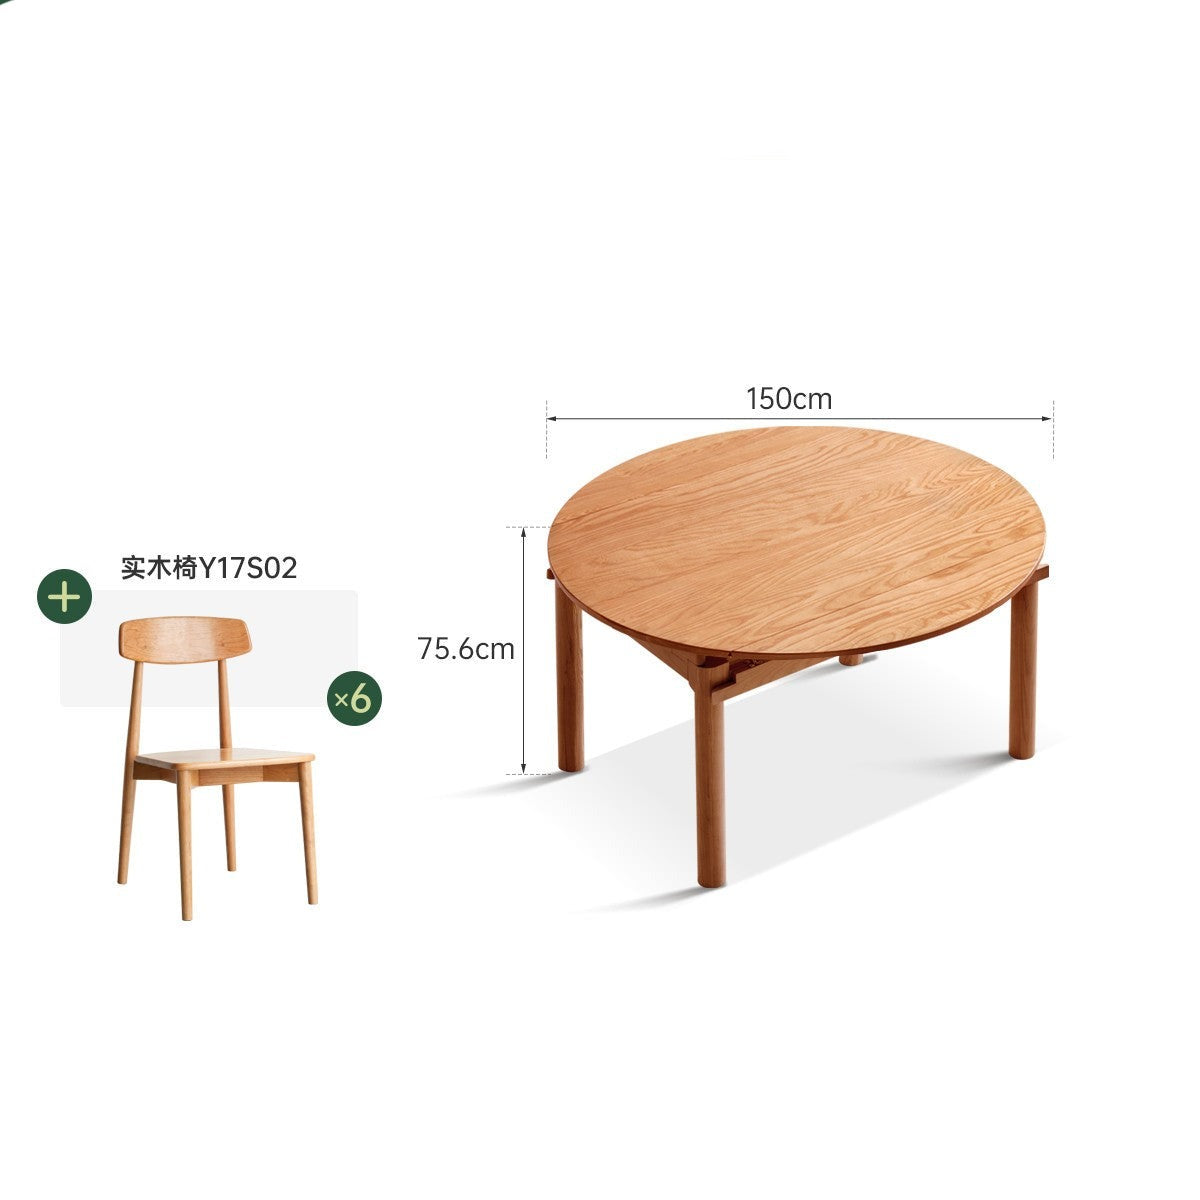 Retractable folding cherry wood round table "